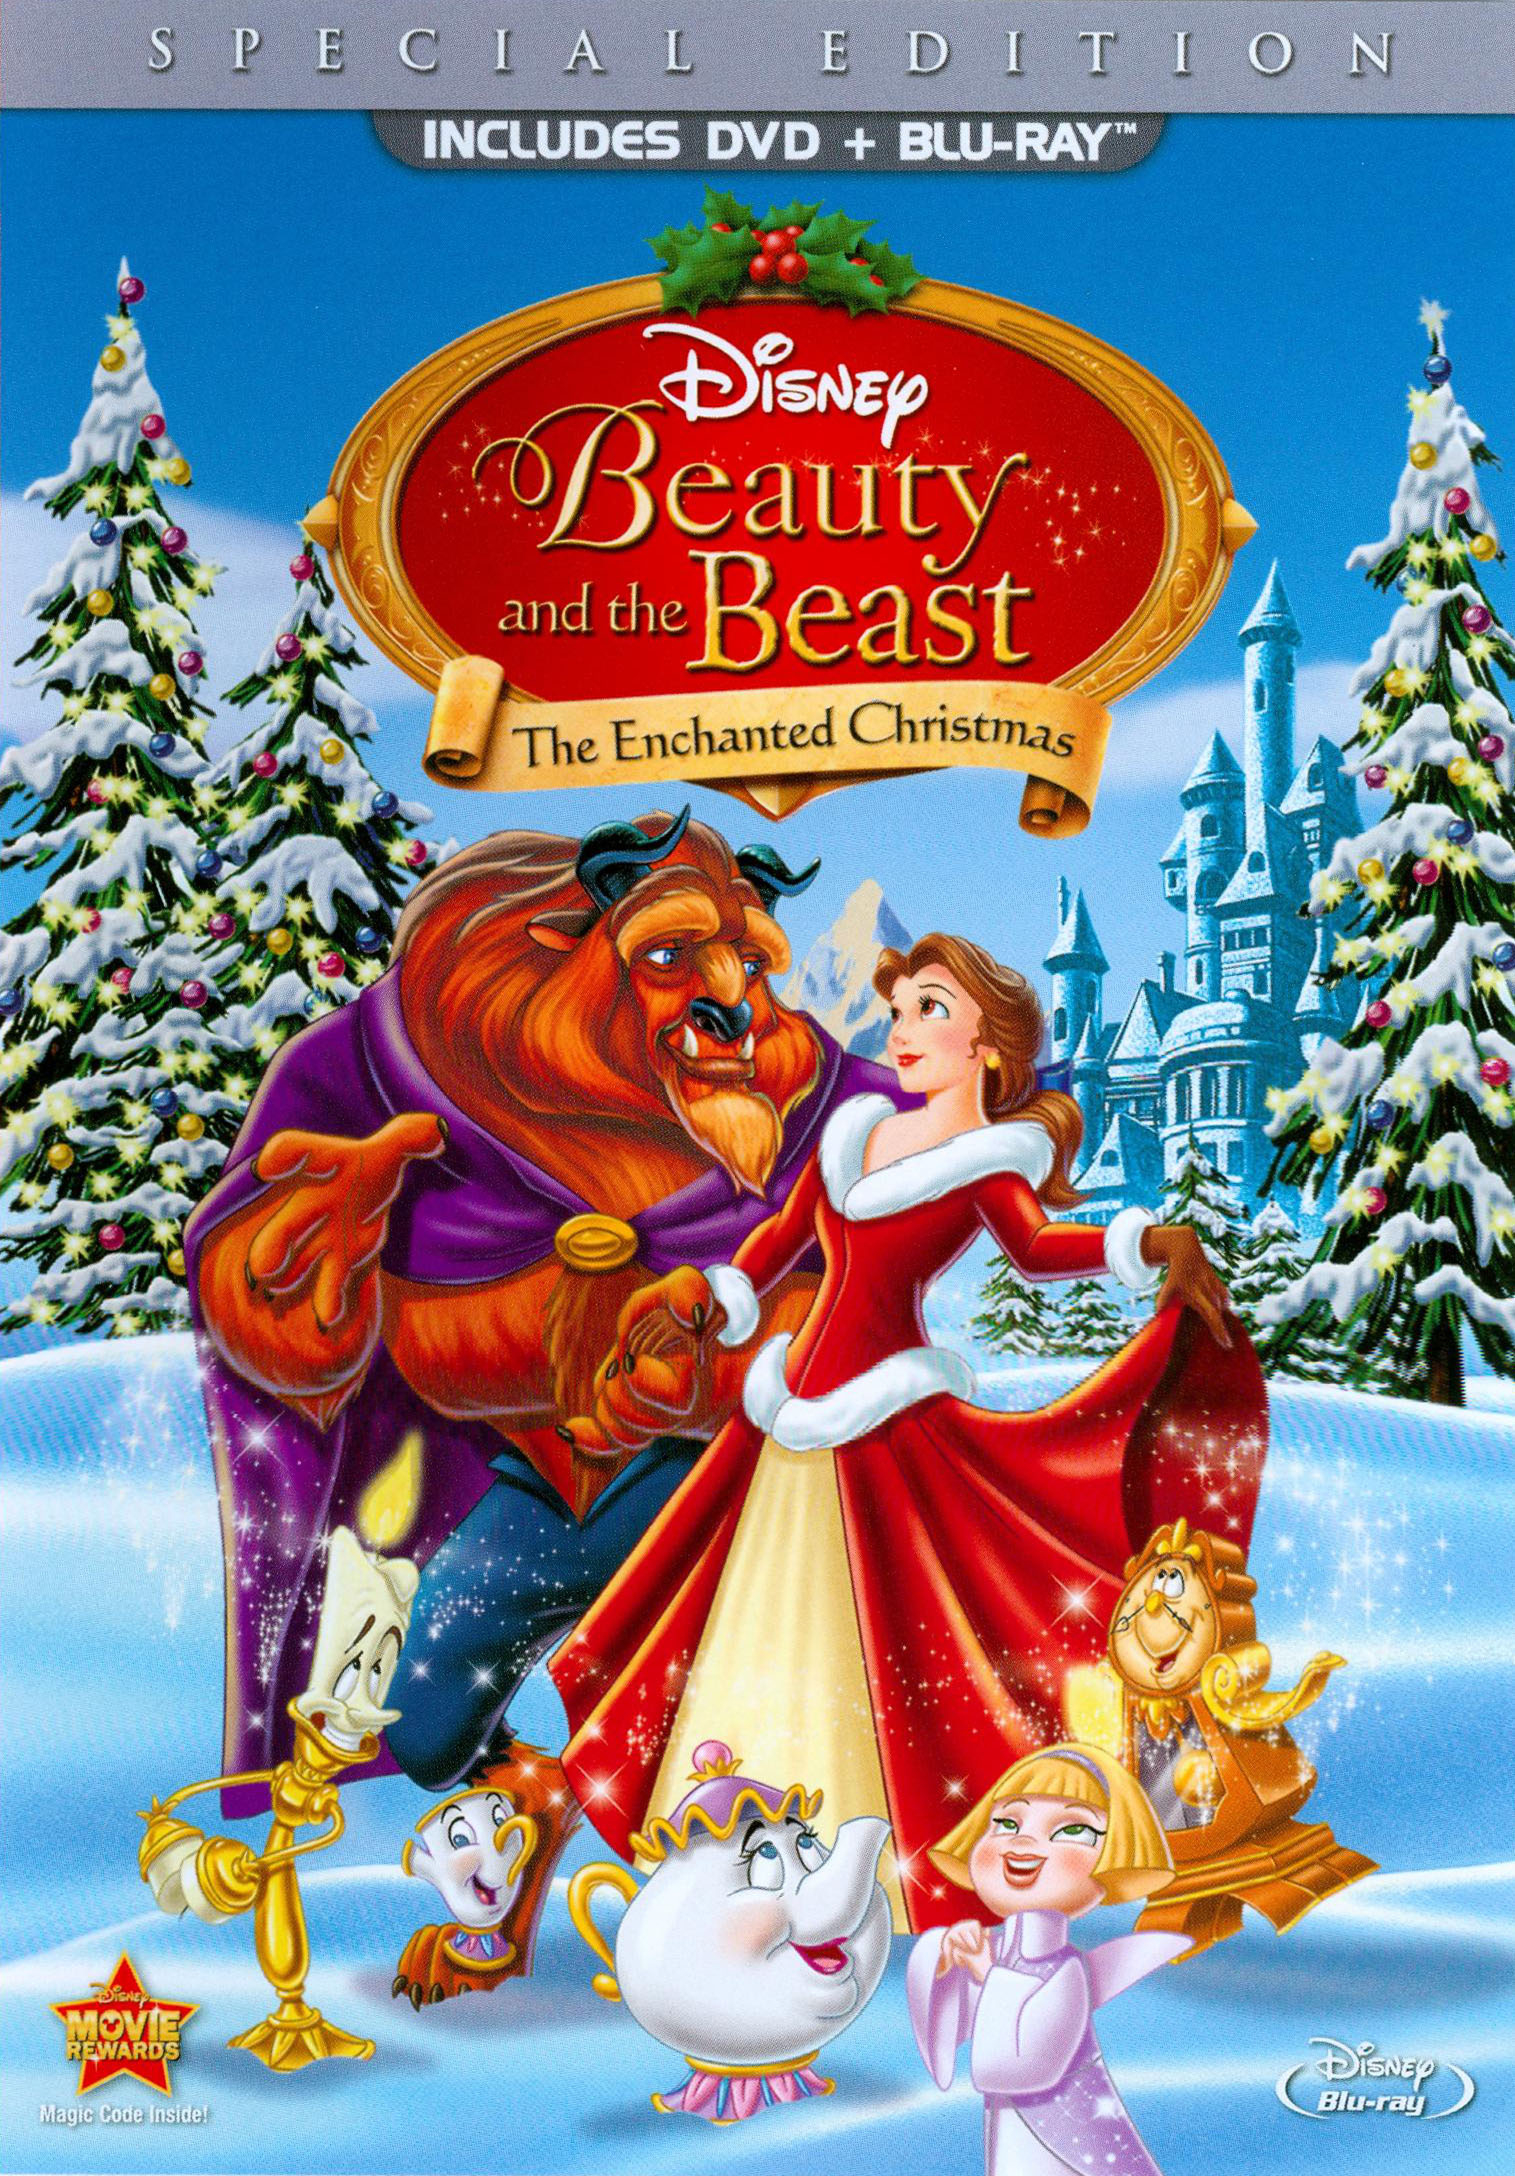 Best Buy: Beauty and the Beast: The Enchanted Christmas [Special Edition]  [2 Discs] [DVD/Blu-ray] [Blu-ray/DVD] [1998]